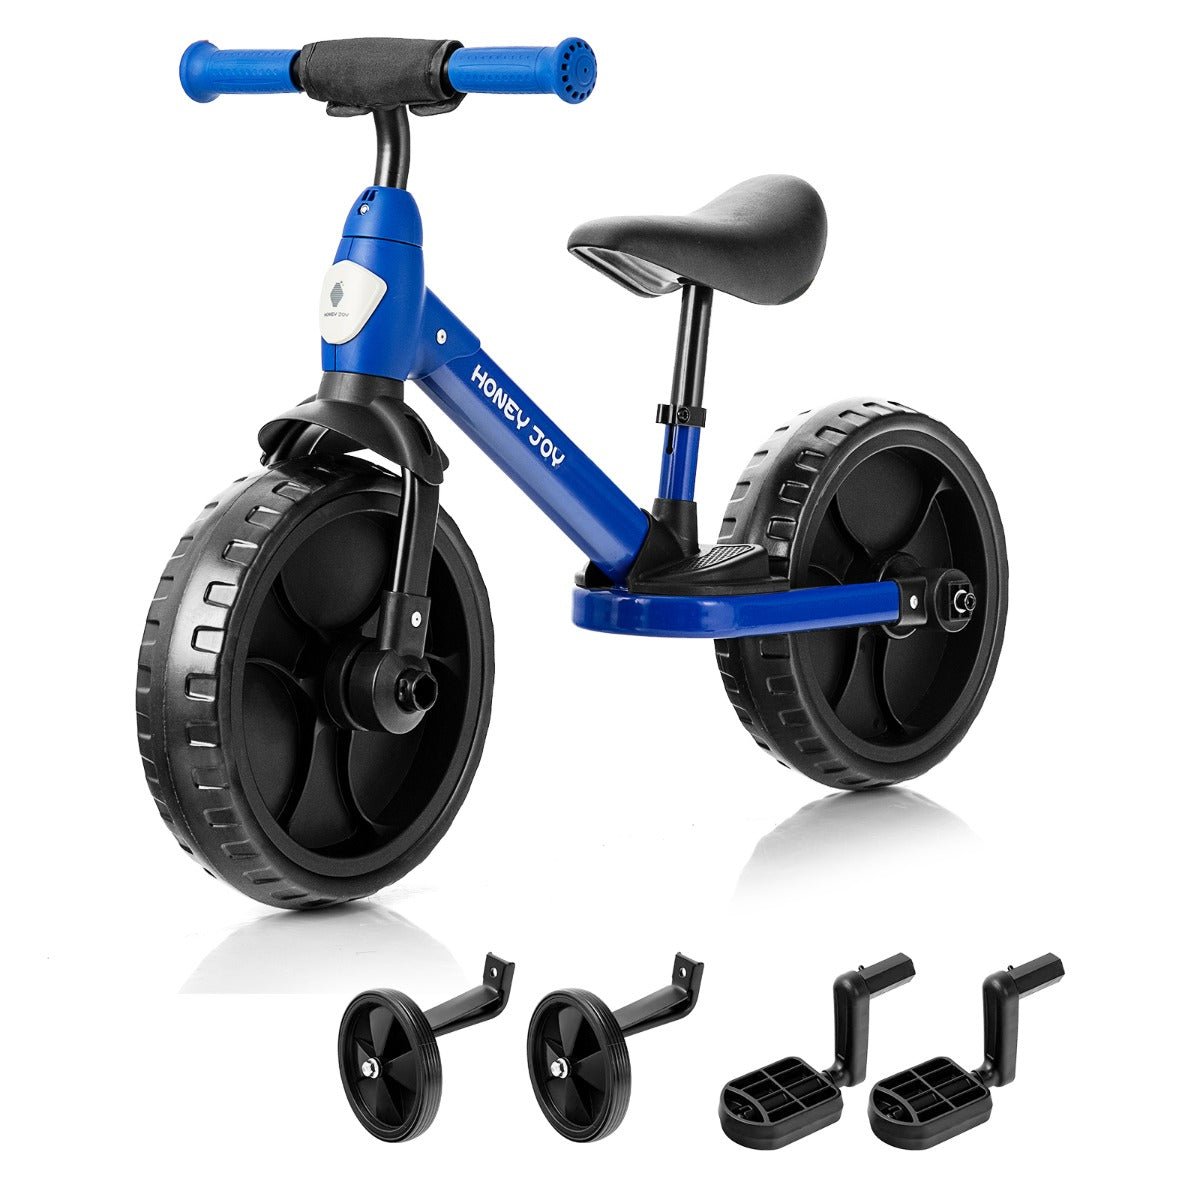 Blue Beginnings: 4-in-1 Kids Training Bike with Training Wheels for Young Riders